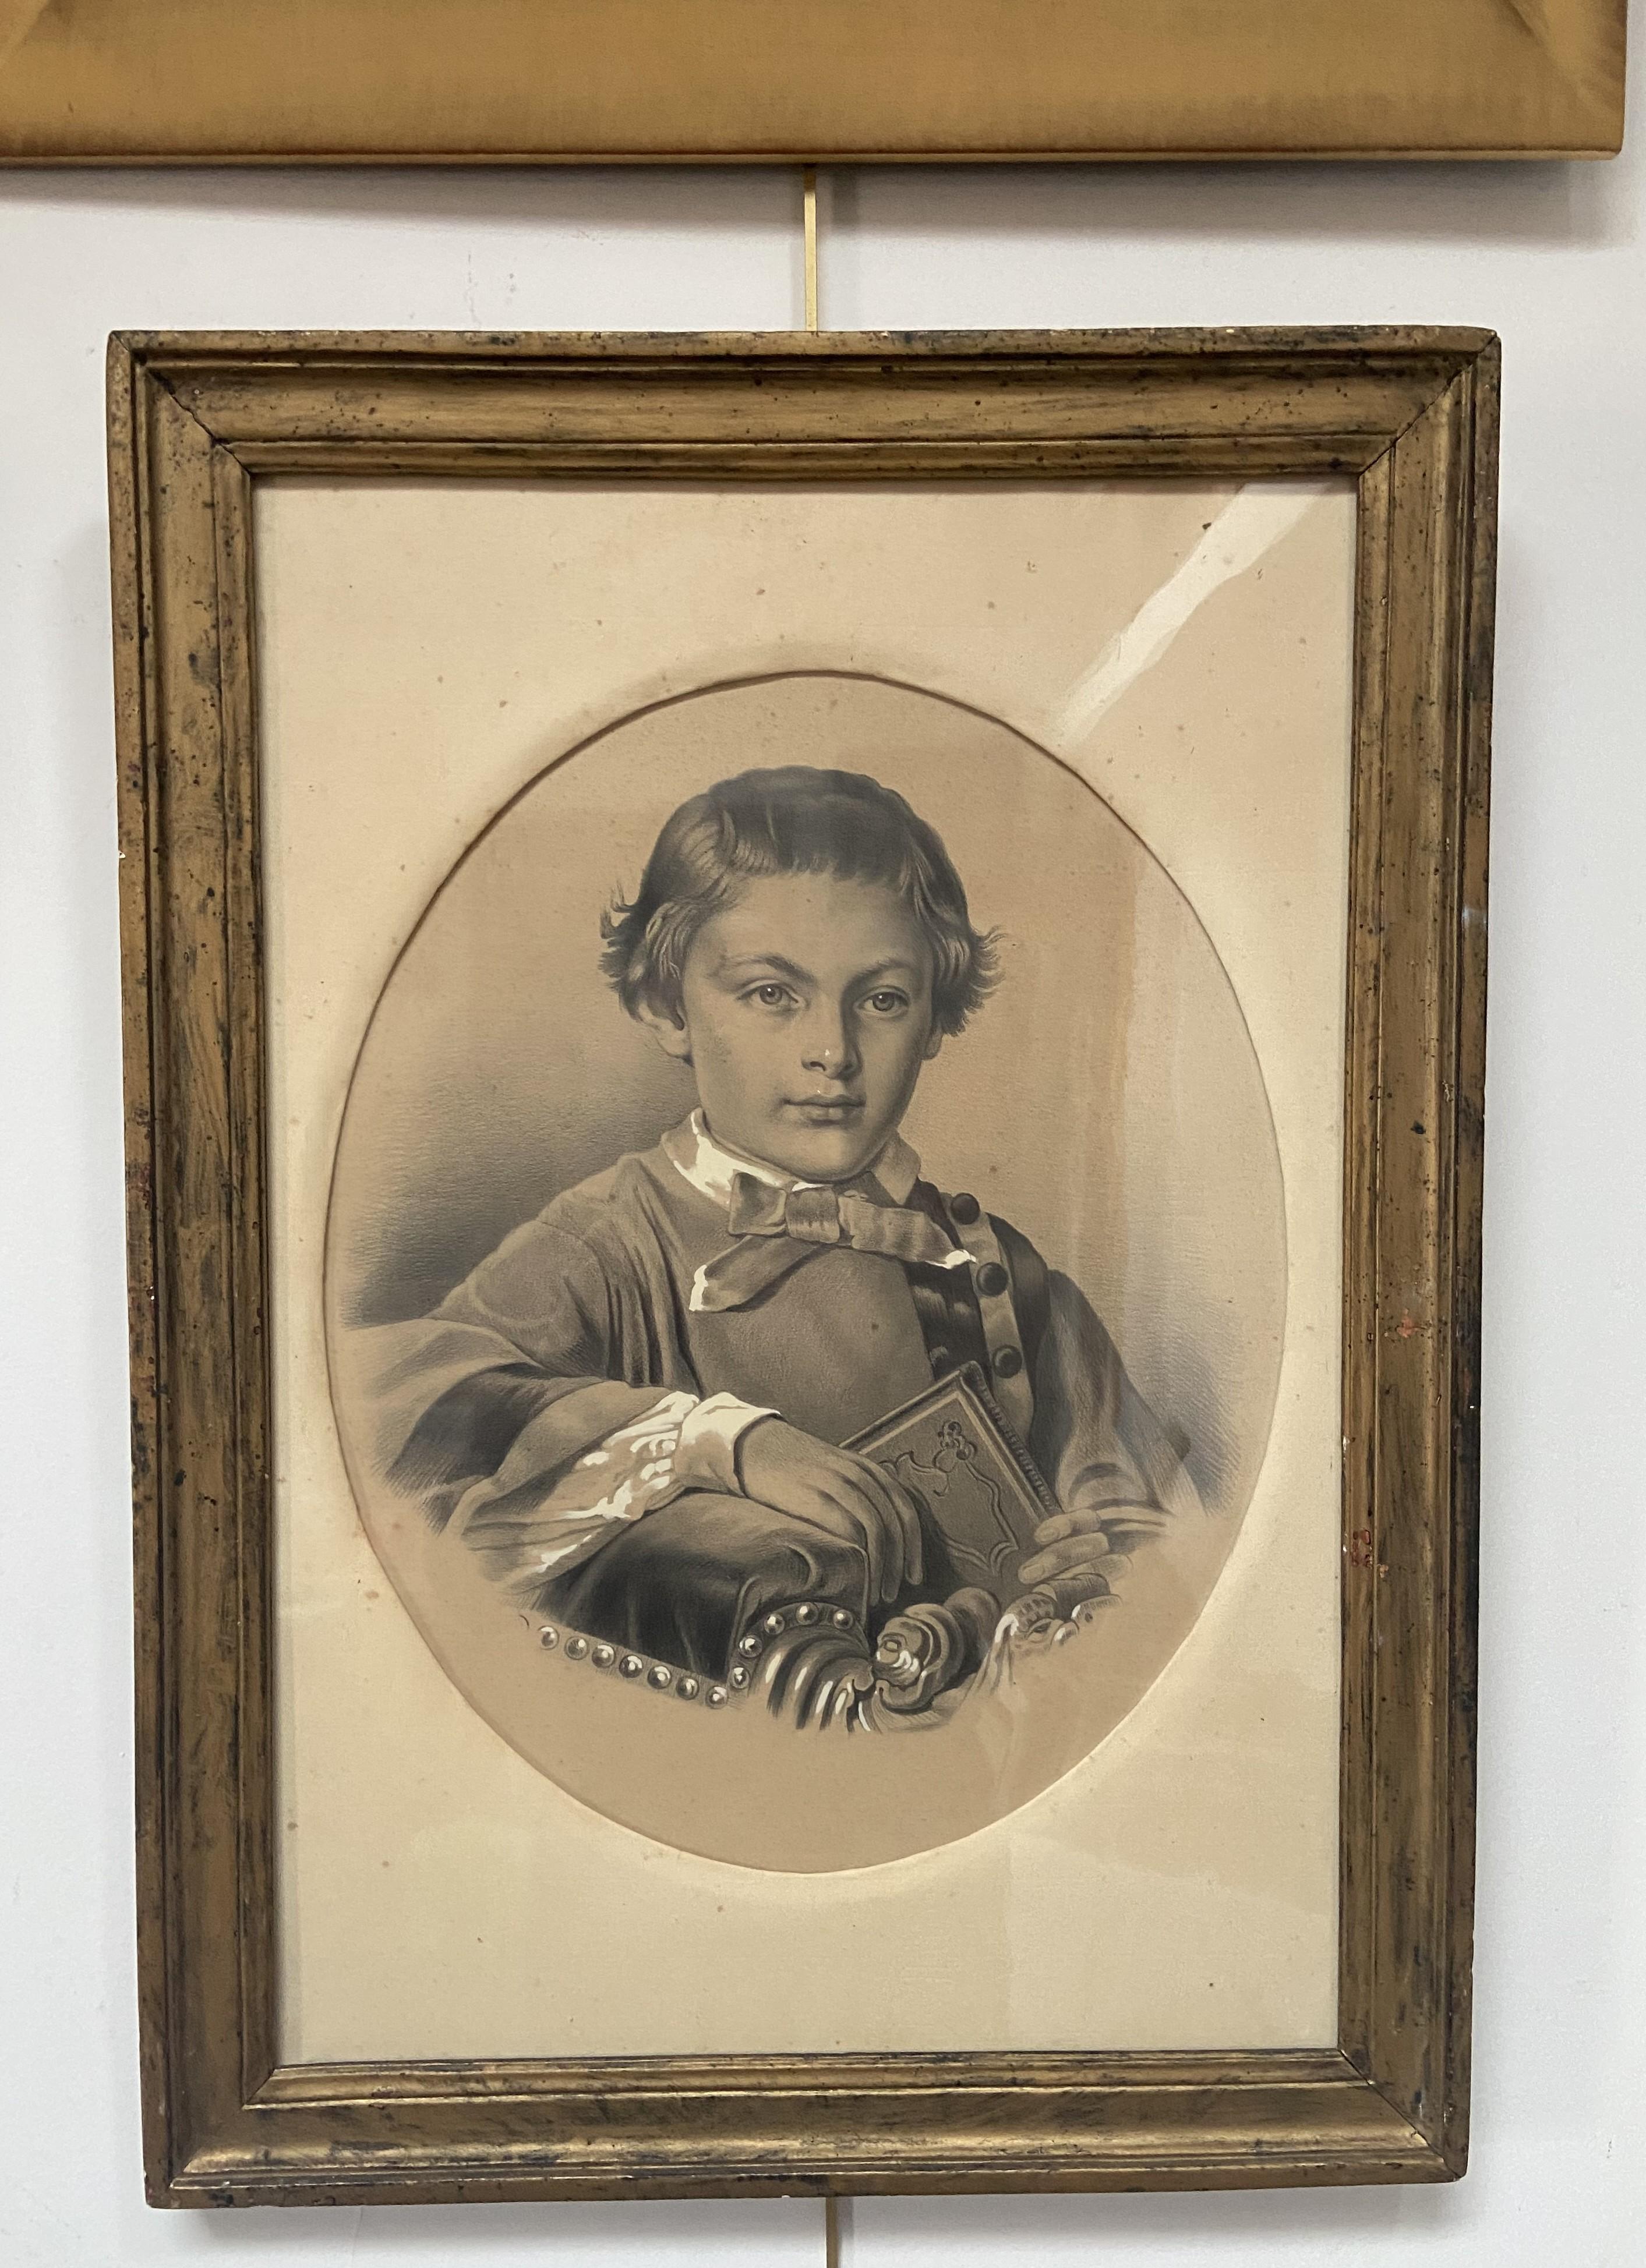 French School circa 1880, Portrait of a boy holding a book, drawing - Academic Art by Unknown